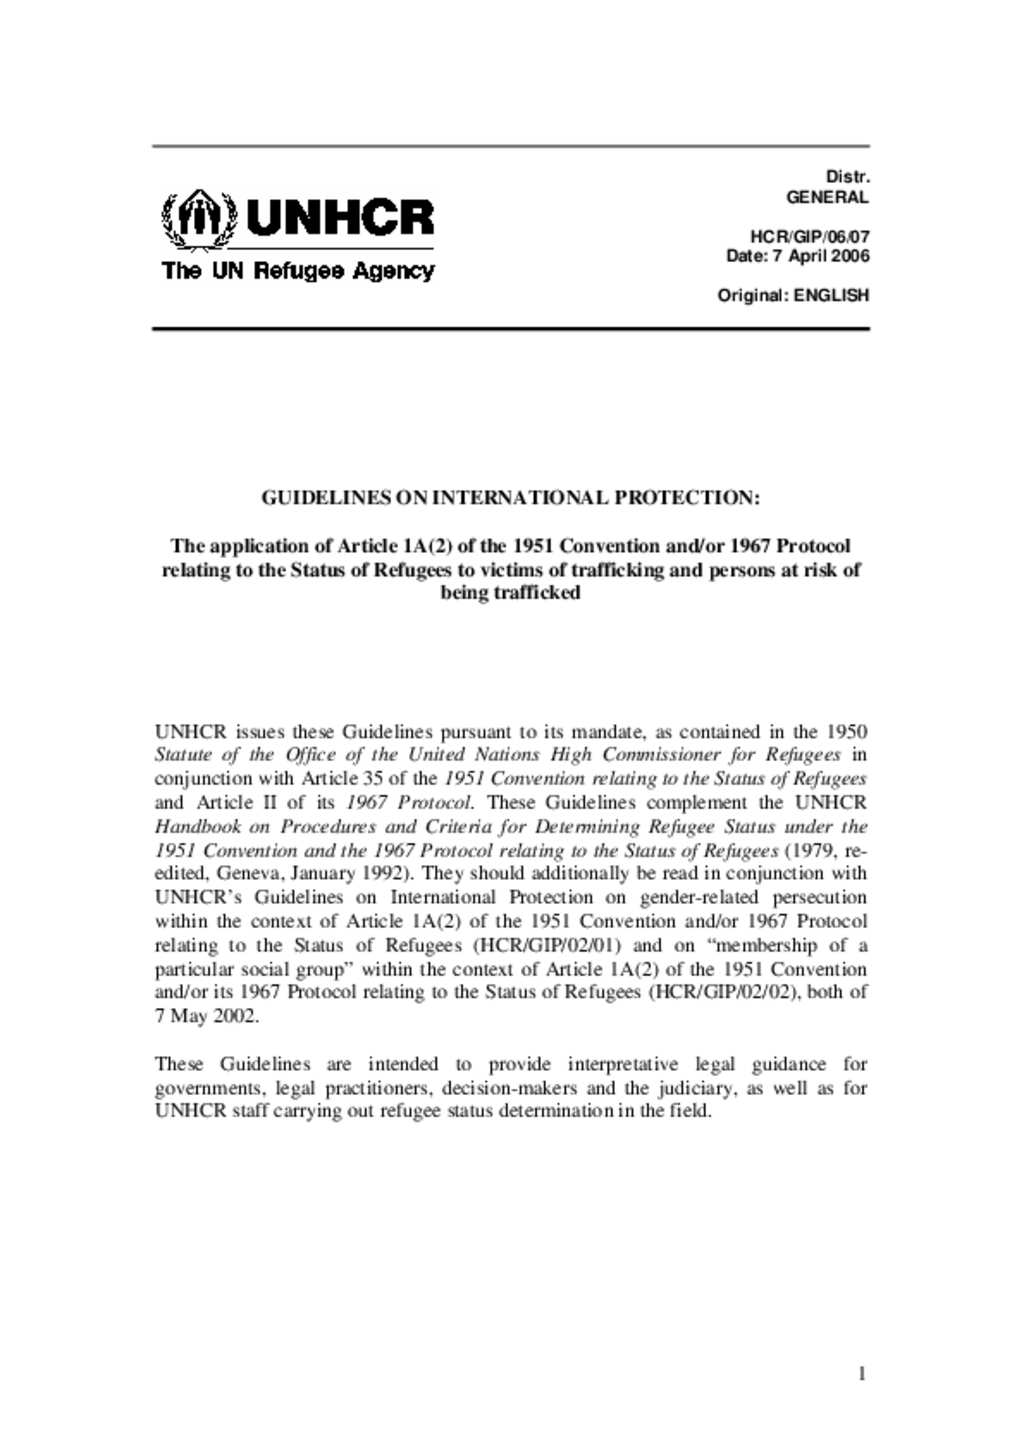 how to write an application letter to unhcr